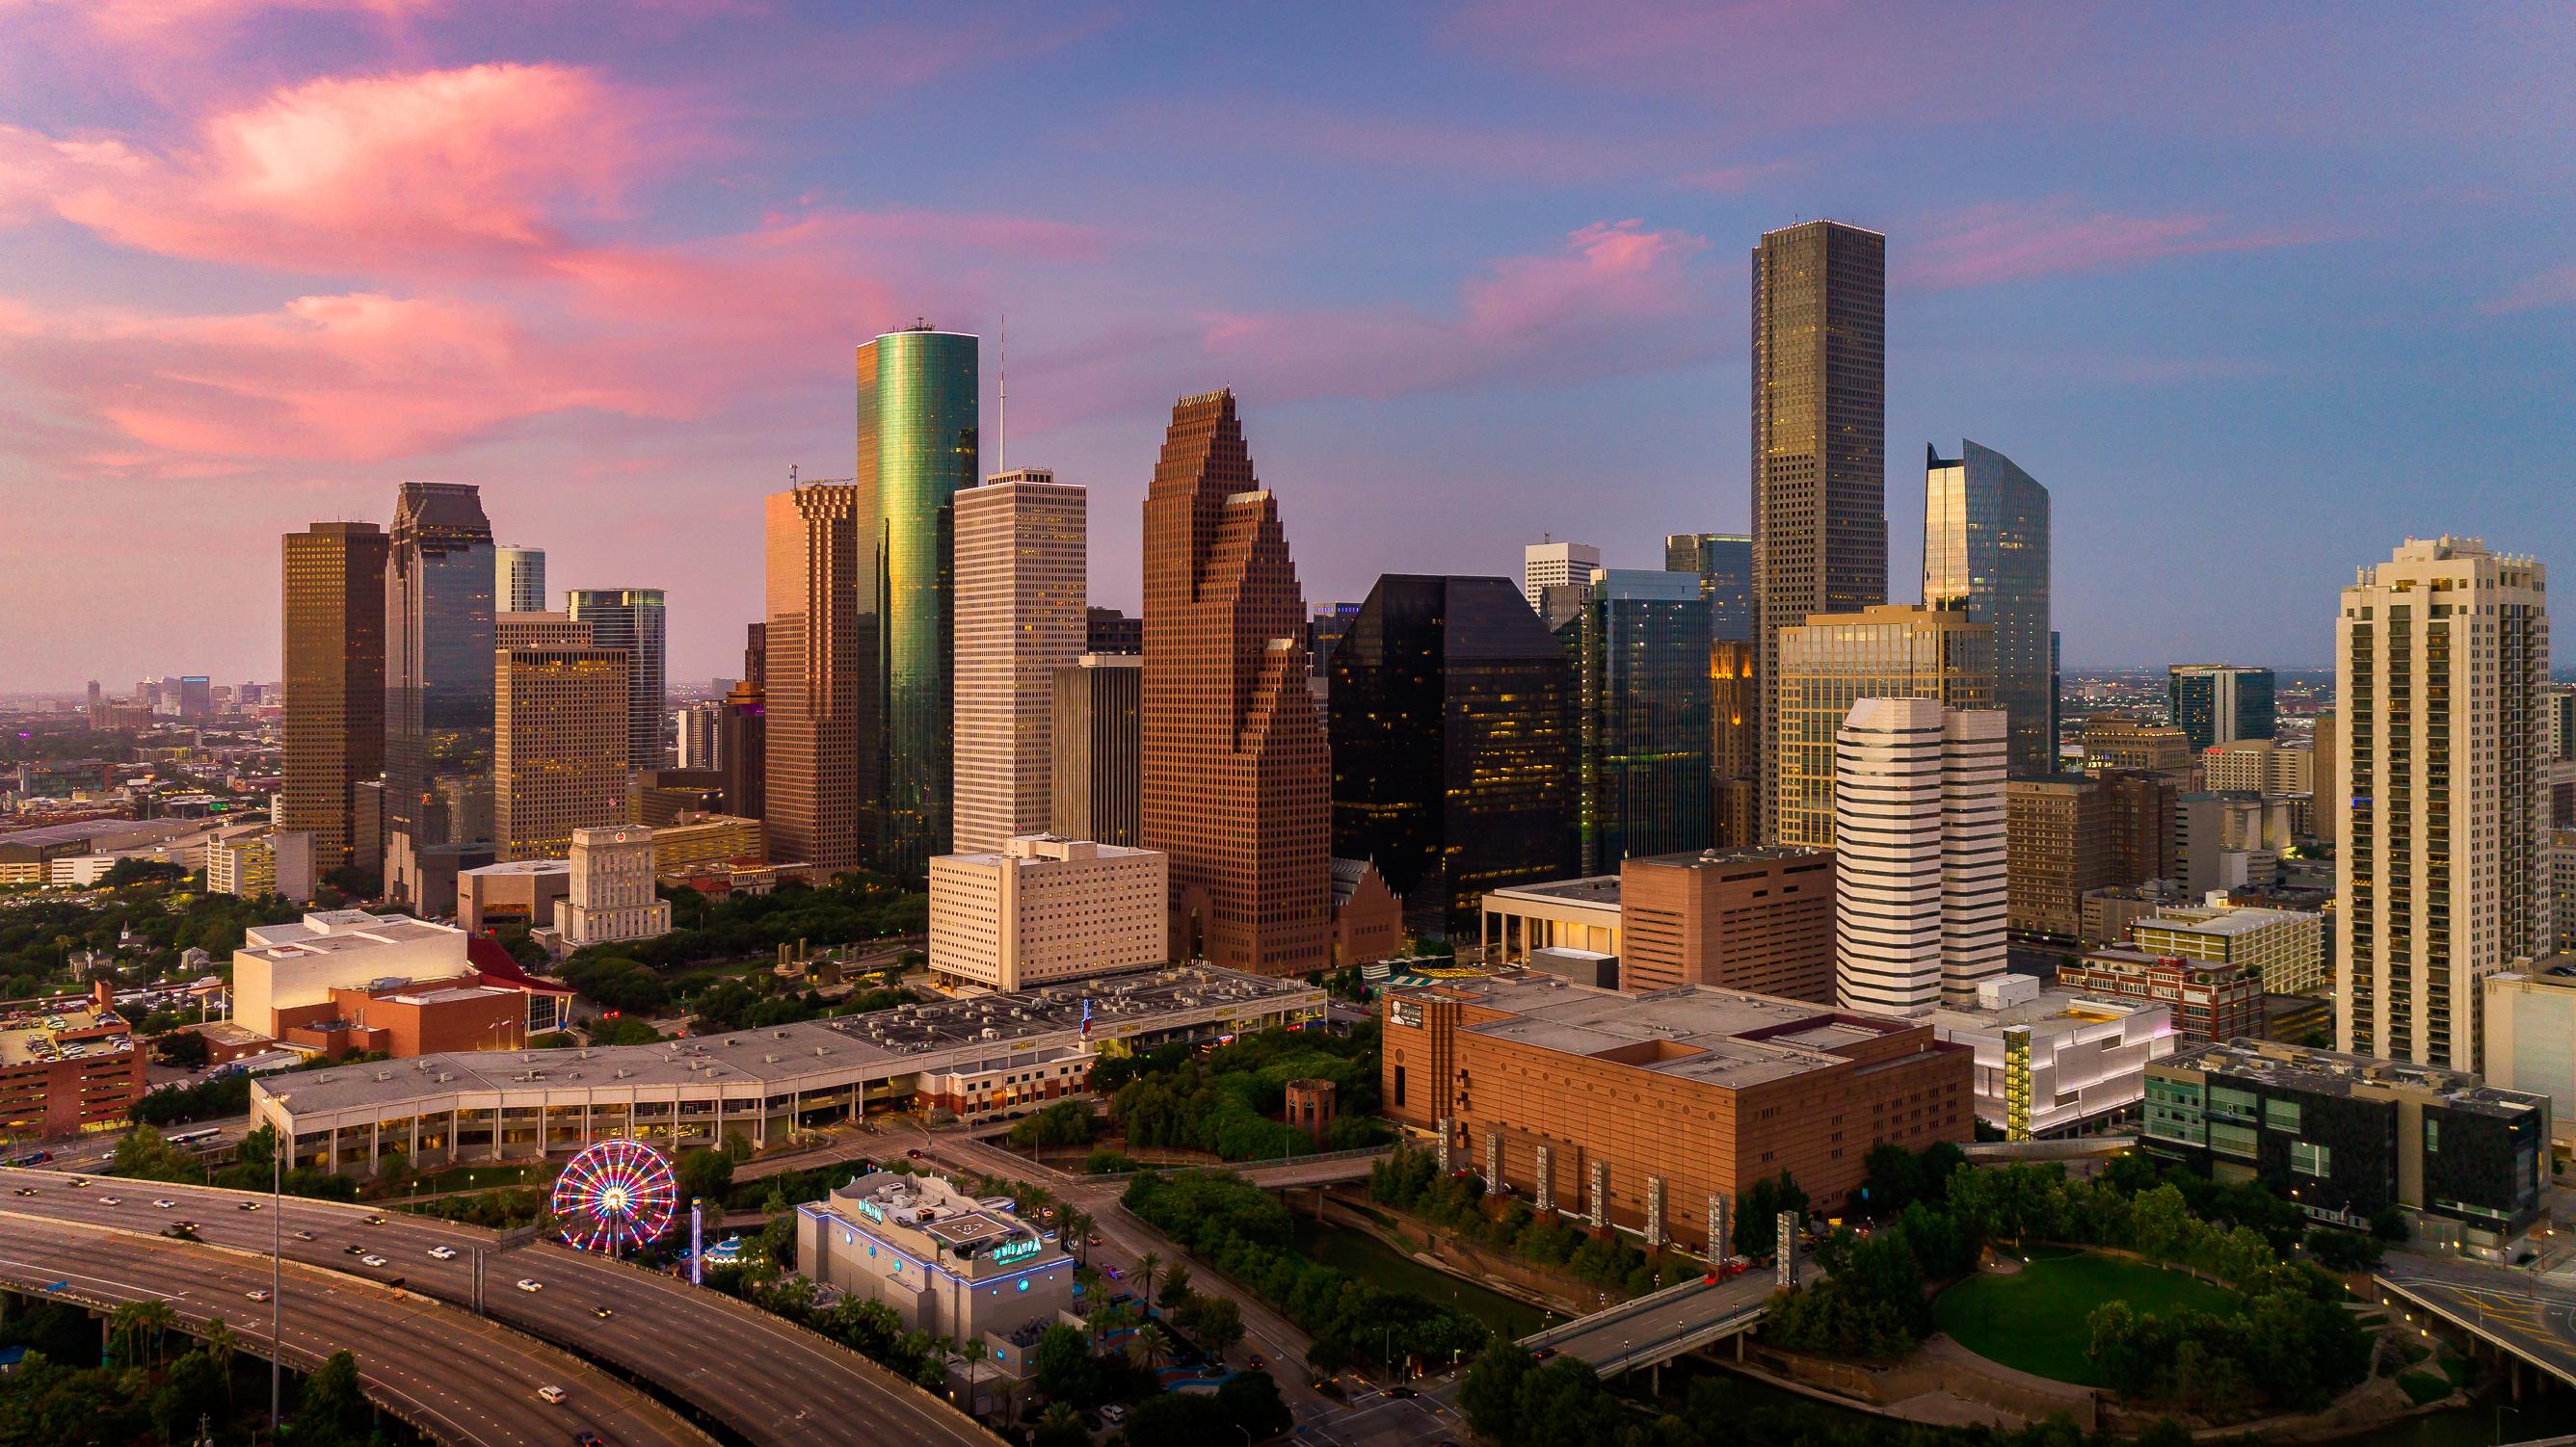 Downtown Houston saw new businesses emerge in 2020 despite the pandemic crisis.